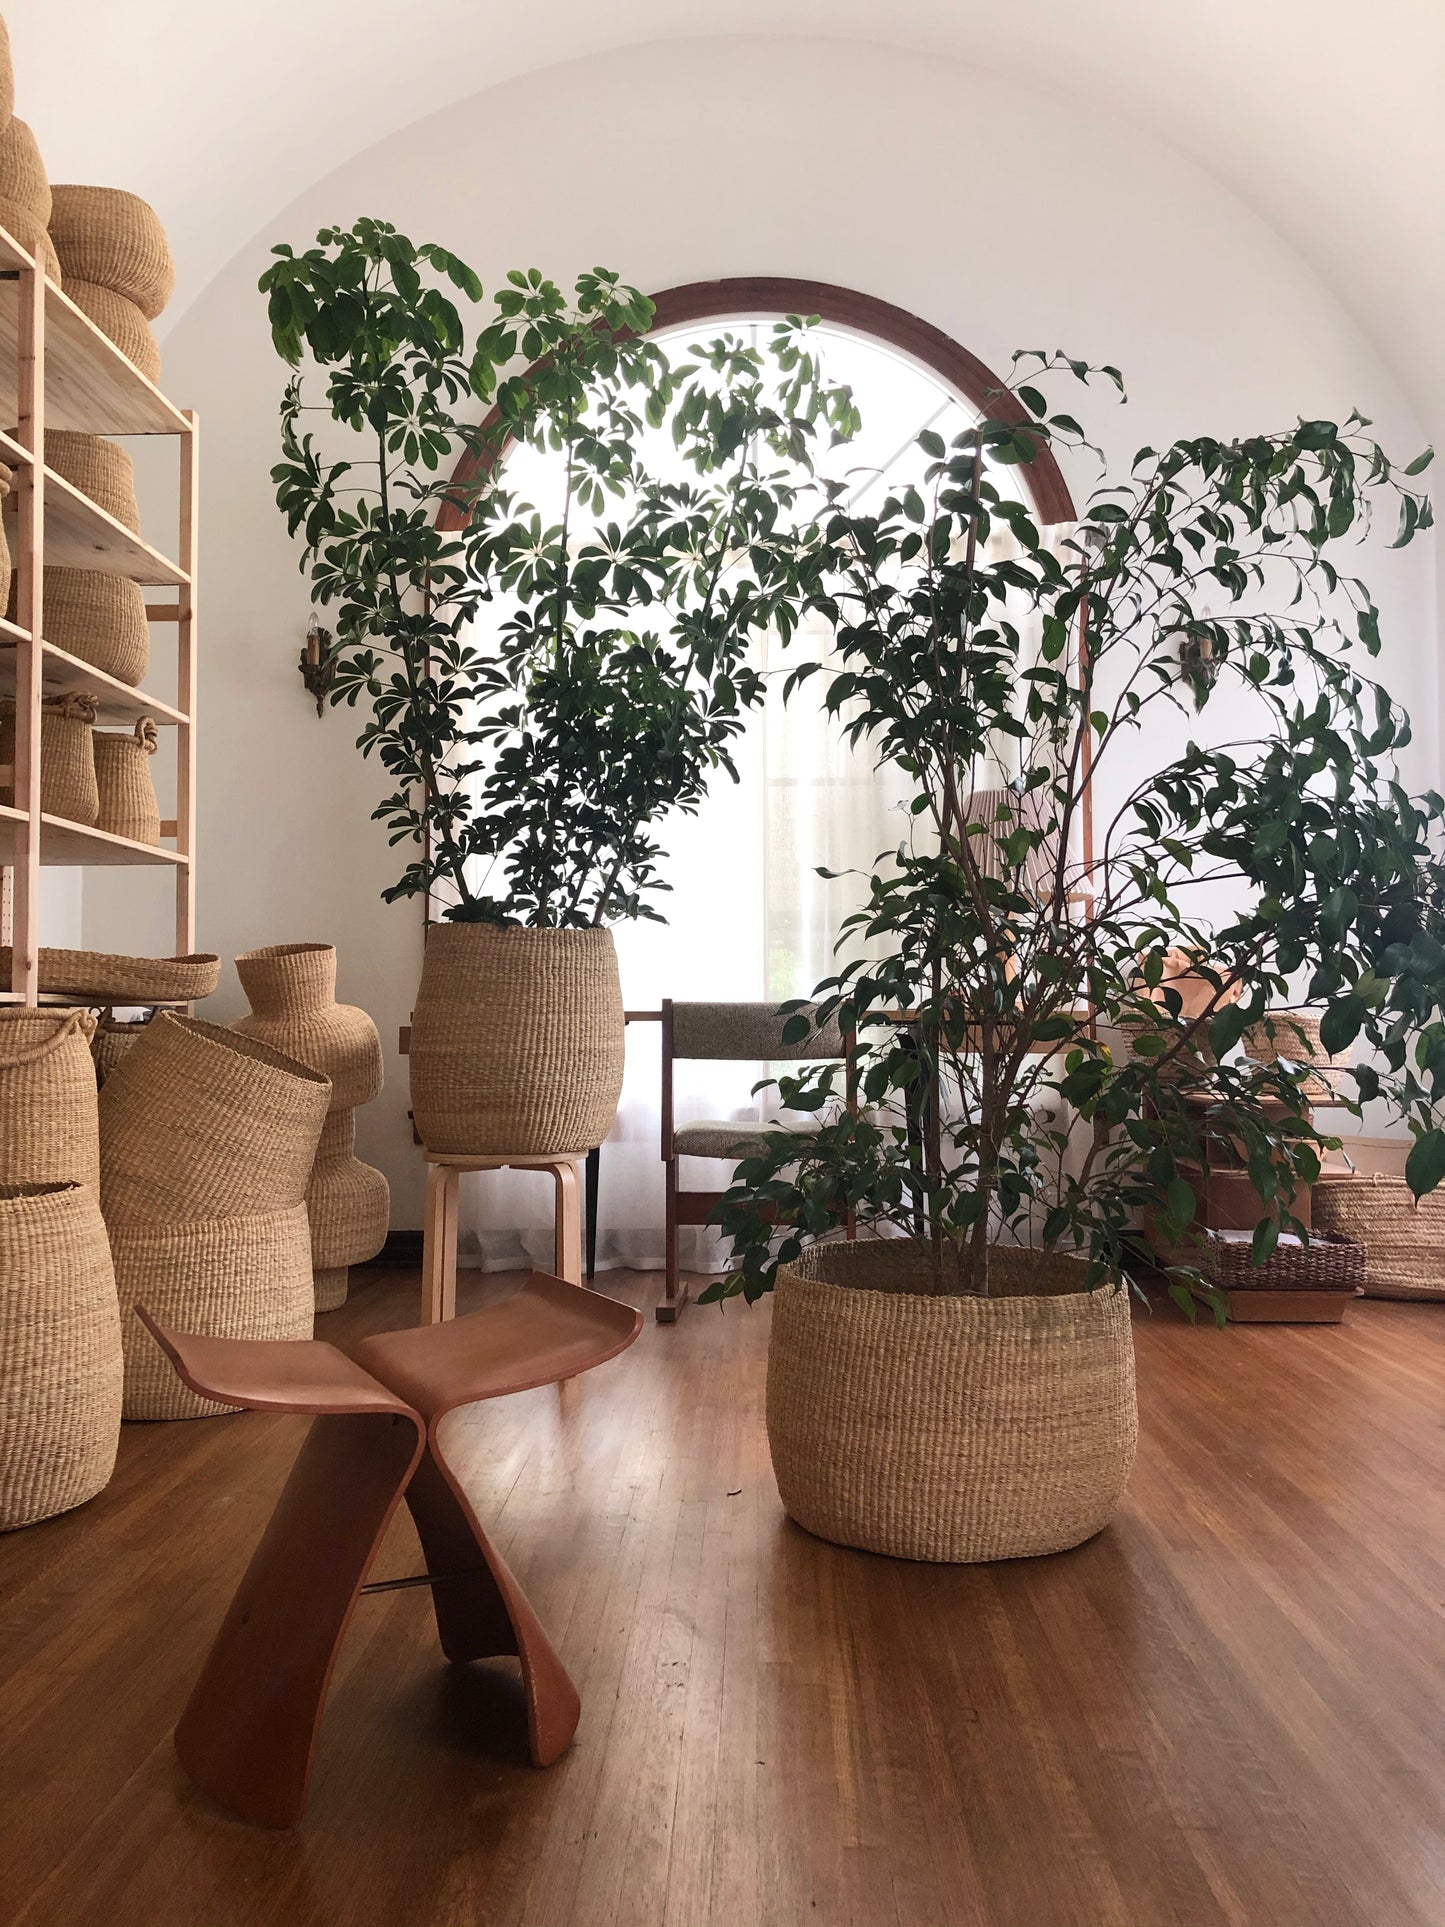 baskets for plants